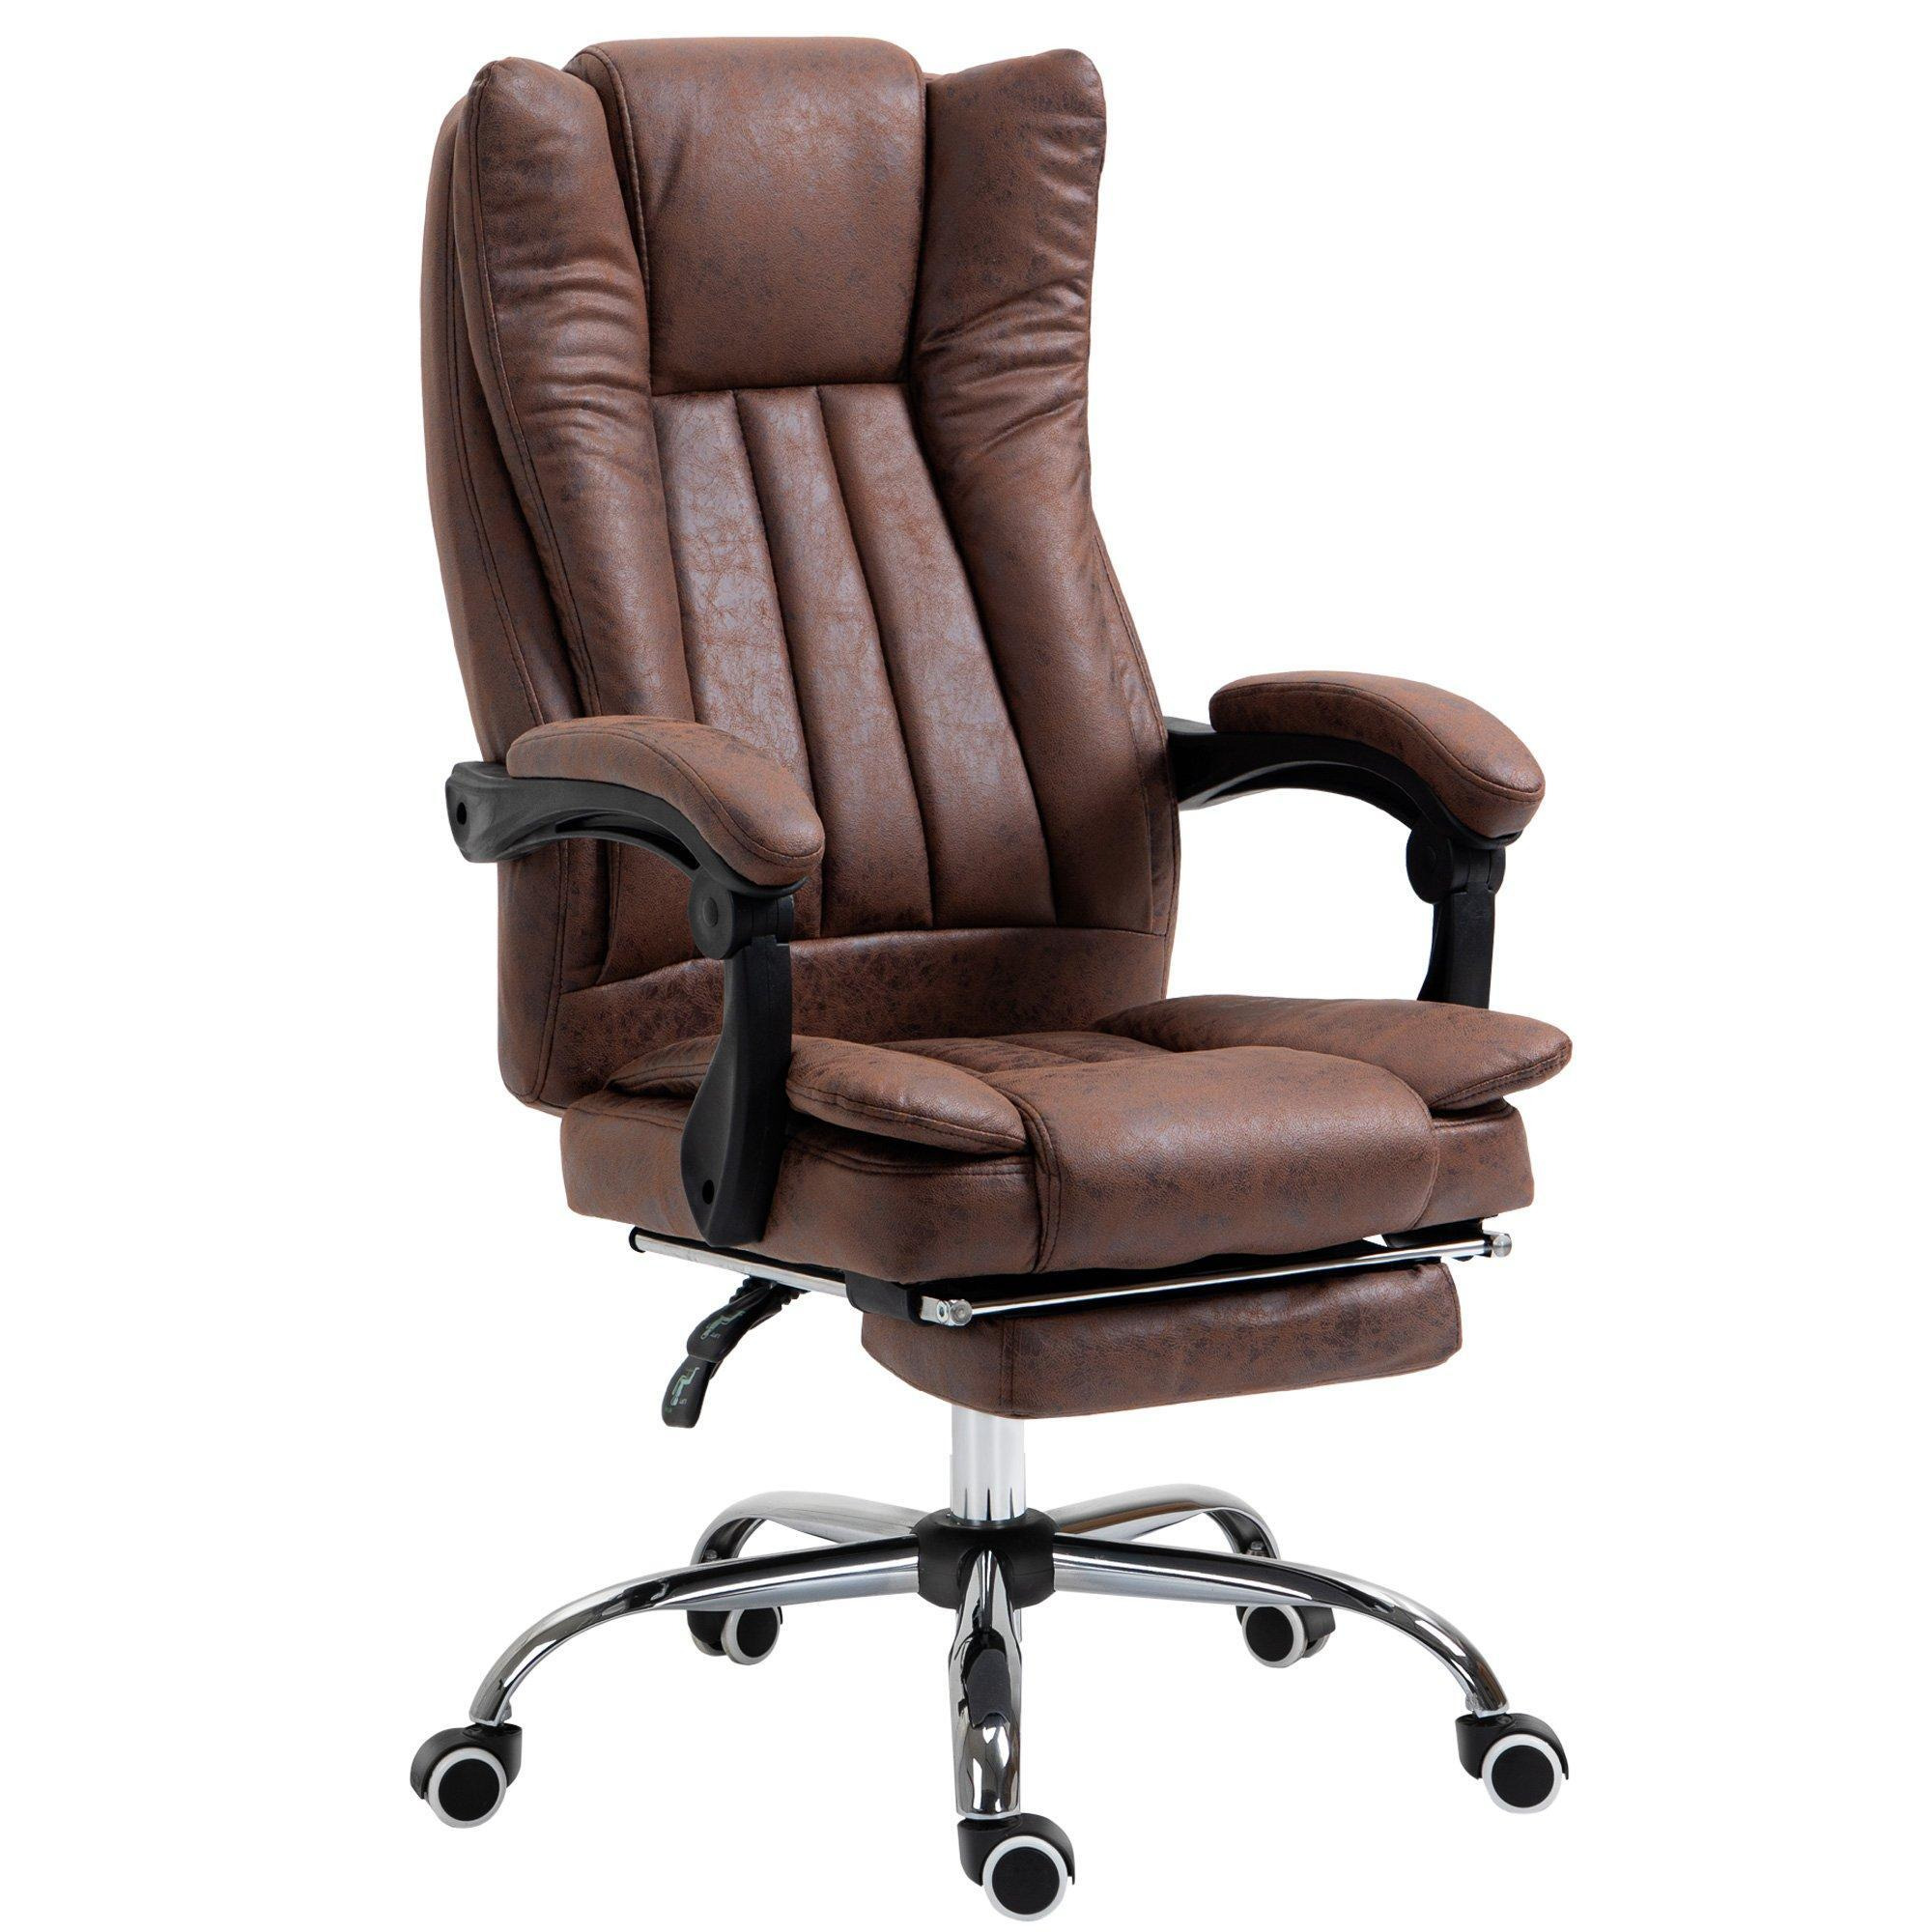 Executive Office Chair Computer Swivel Chair for Home with Arm - image 1